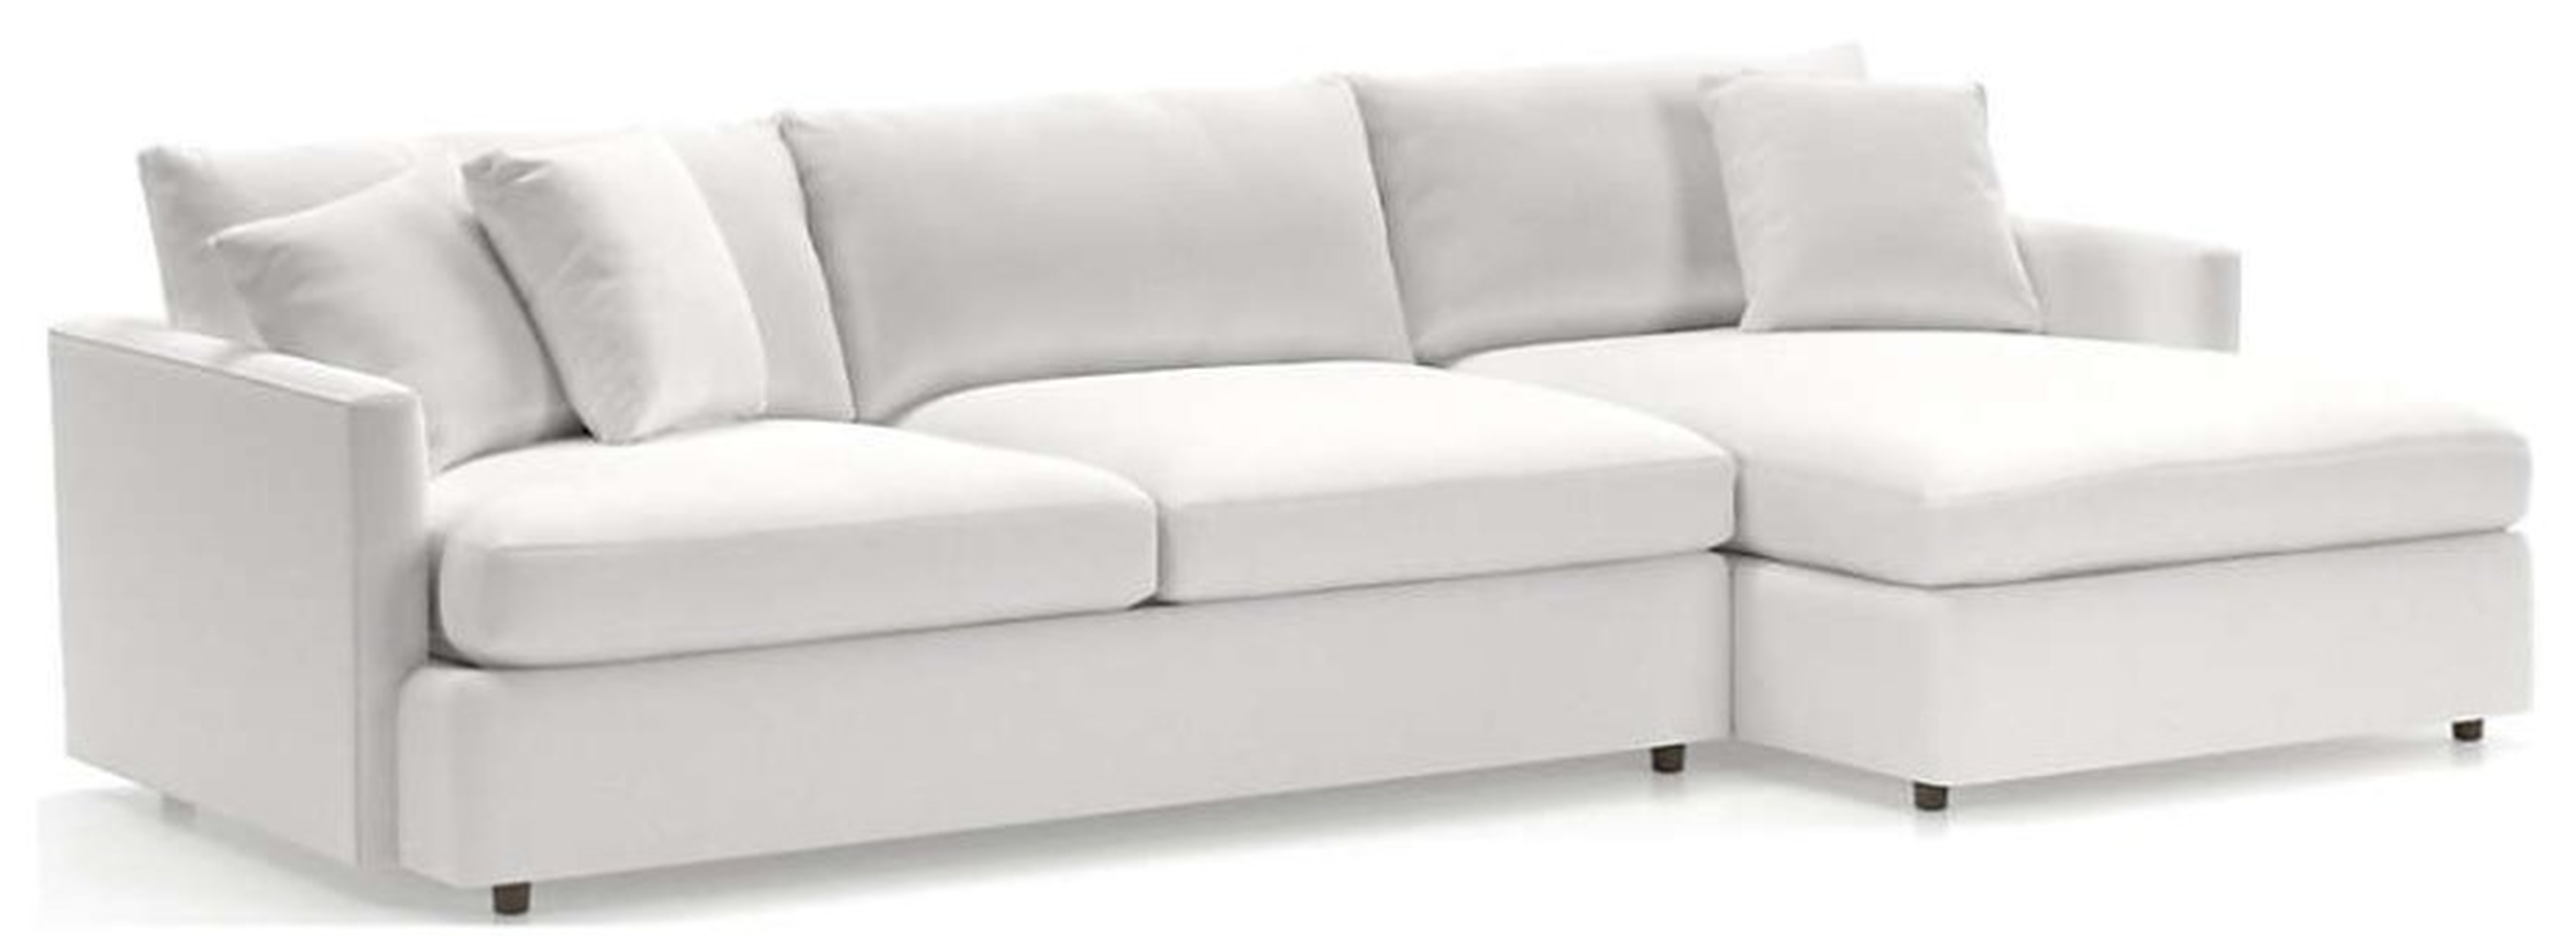 Lounge II Petite 2-Piece Sectional Sofa, View Whte - Crate and Barrel